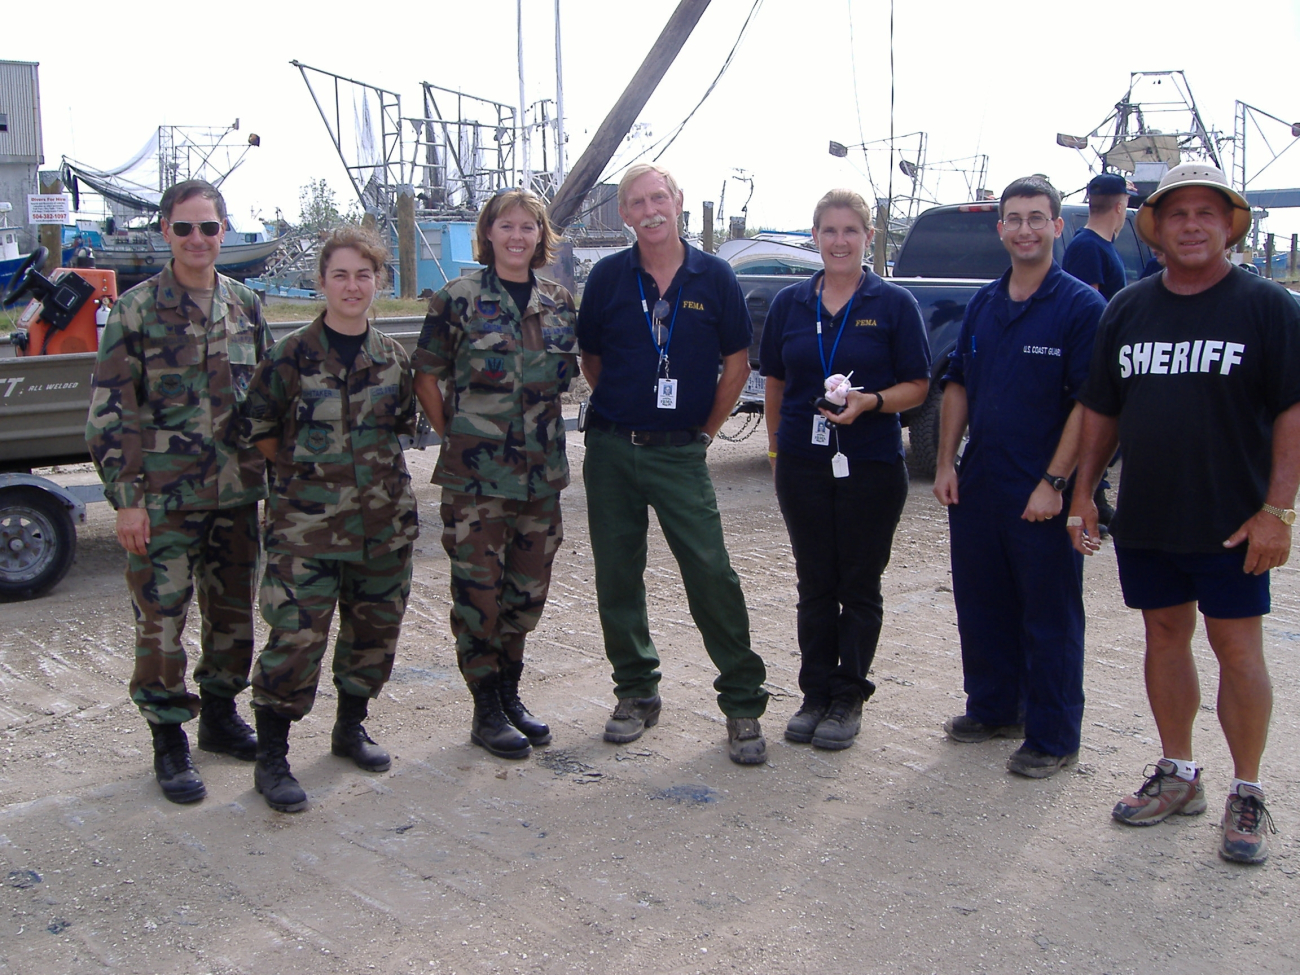 National Guardk FMA, and local sheriff working together to rebuild afterHurricane Katrina